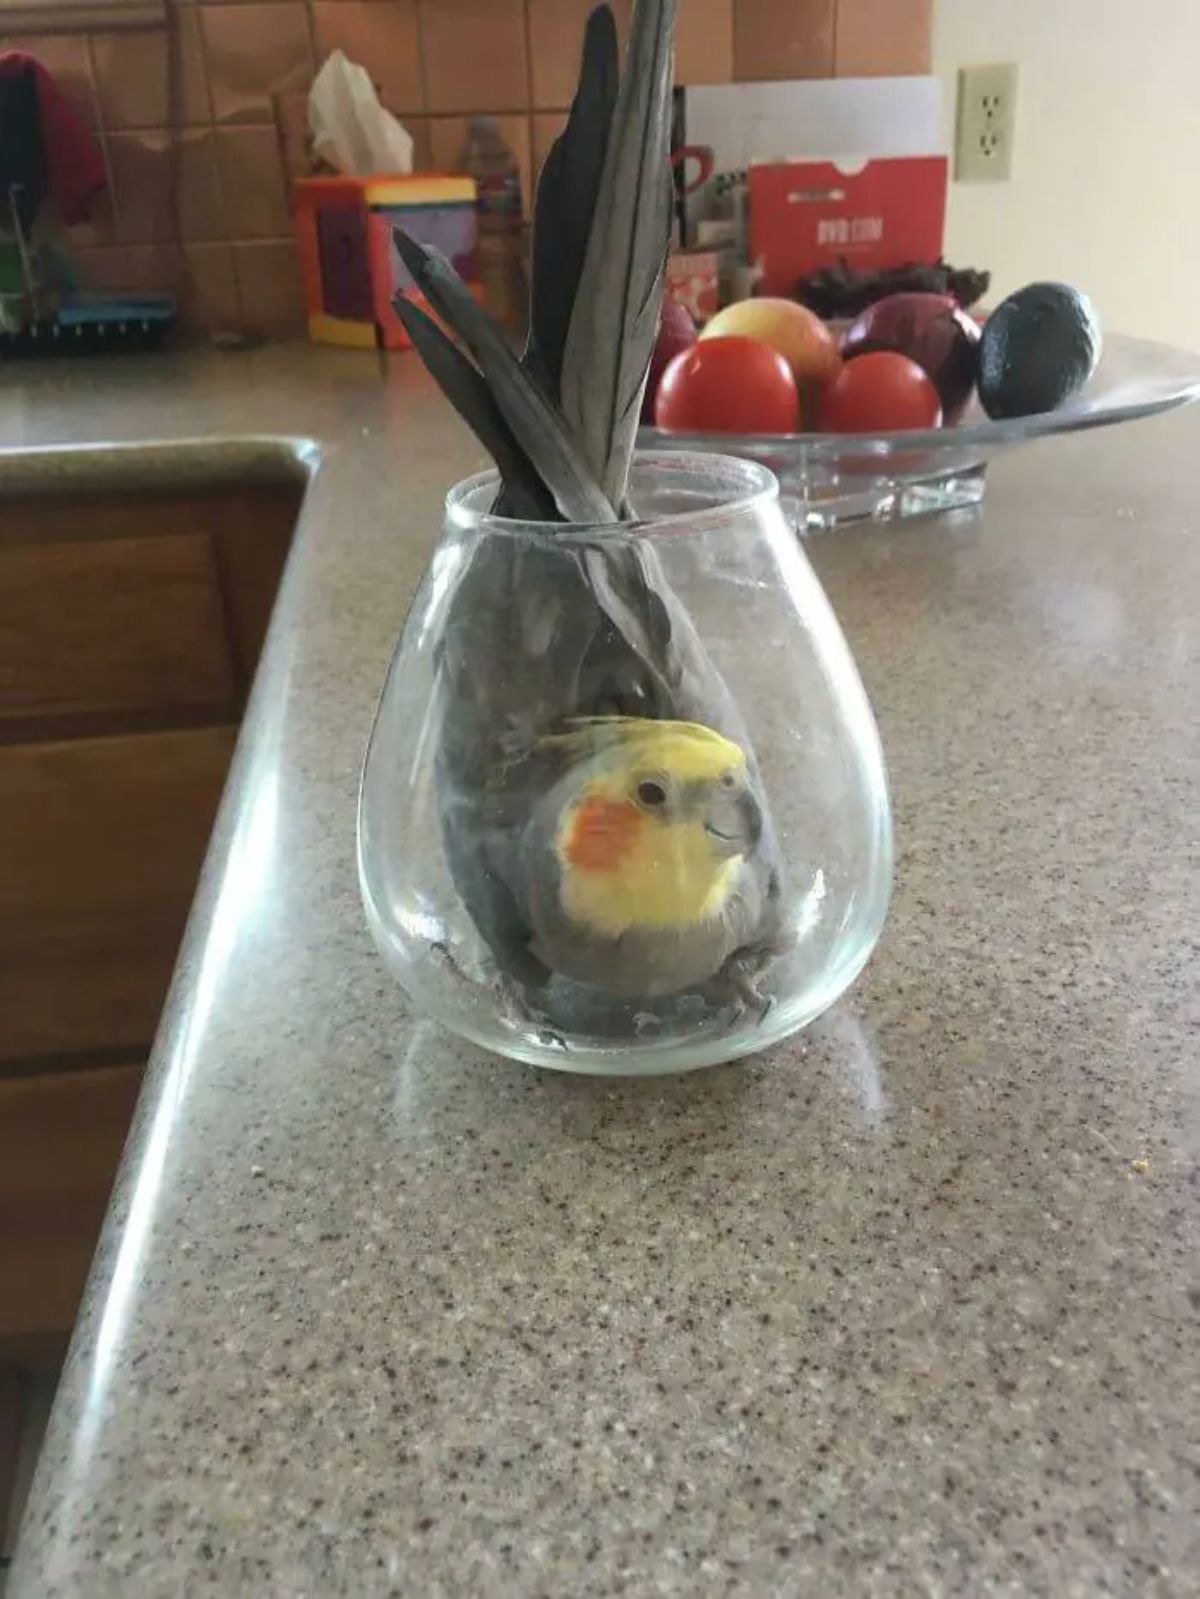 grey and yellow parrot inside a glass vase